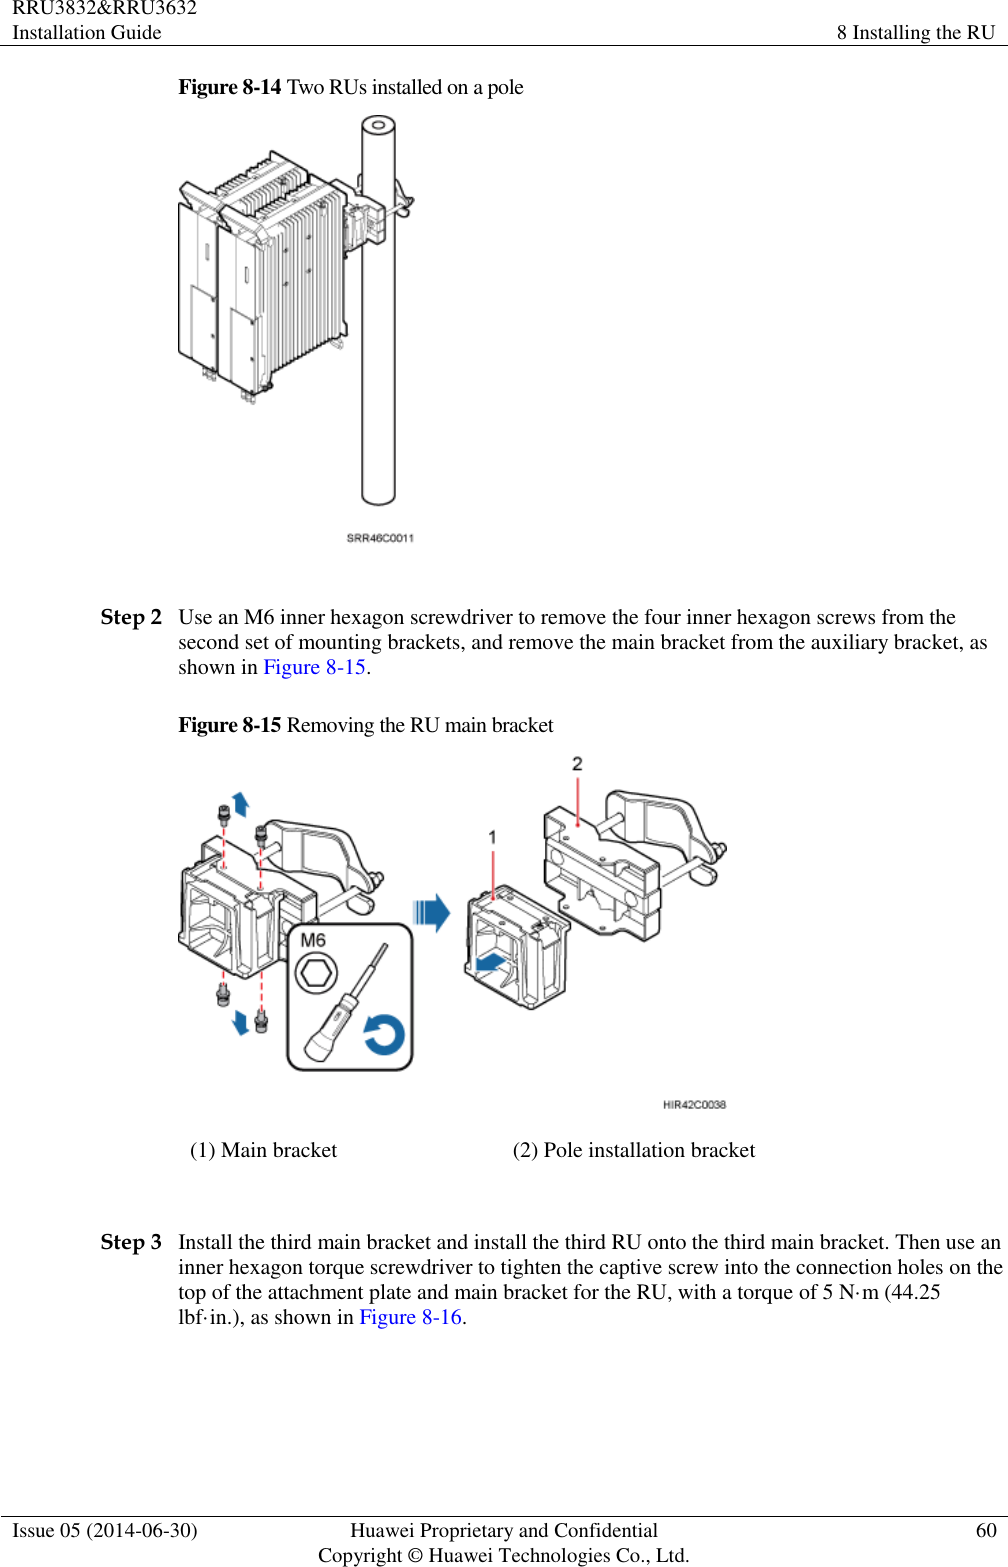 RRU3832&amp;RRU3632 Installation Guide 8 Installing the RU  Issue 05 (2014-06-30) Huawei Proprietary and Confidential                                     Copyright © Huawei Technologies Co., Ltd. 60  Figure 8-14 Two RUs installed on a pole   Step 2 Use an M6 inner hexagon screwdriver to remove the four inner hexagon screws from the second set of mounting brackets, and remove the main bracket from the auxiliary bracket, as shown in Figure 8-15. Figure 8-15 Removing the RU main bracket  (1) Main bracket (2) Pole installation bracket  Step 3 Install the third main bracket and install the third RU onto the third main bracket. Then use an inner hexagon torque screwdriver to tighten the captive screw into the connection holes on the top of the attachment plate and main bracket for the RU, with a torque of 5 N·m (44.25 lbf·in.), as shown in Figure 8-16.  